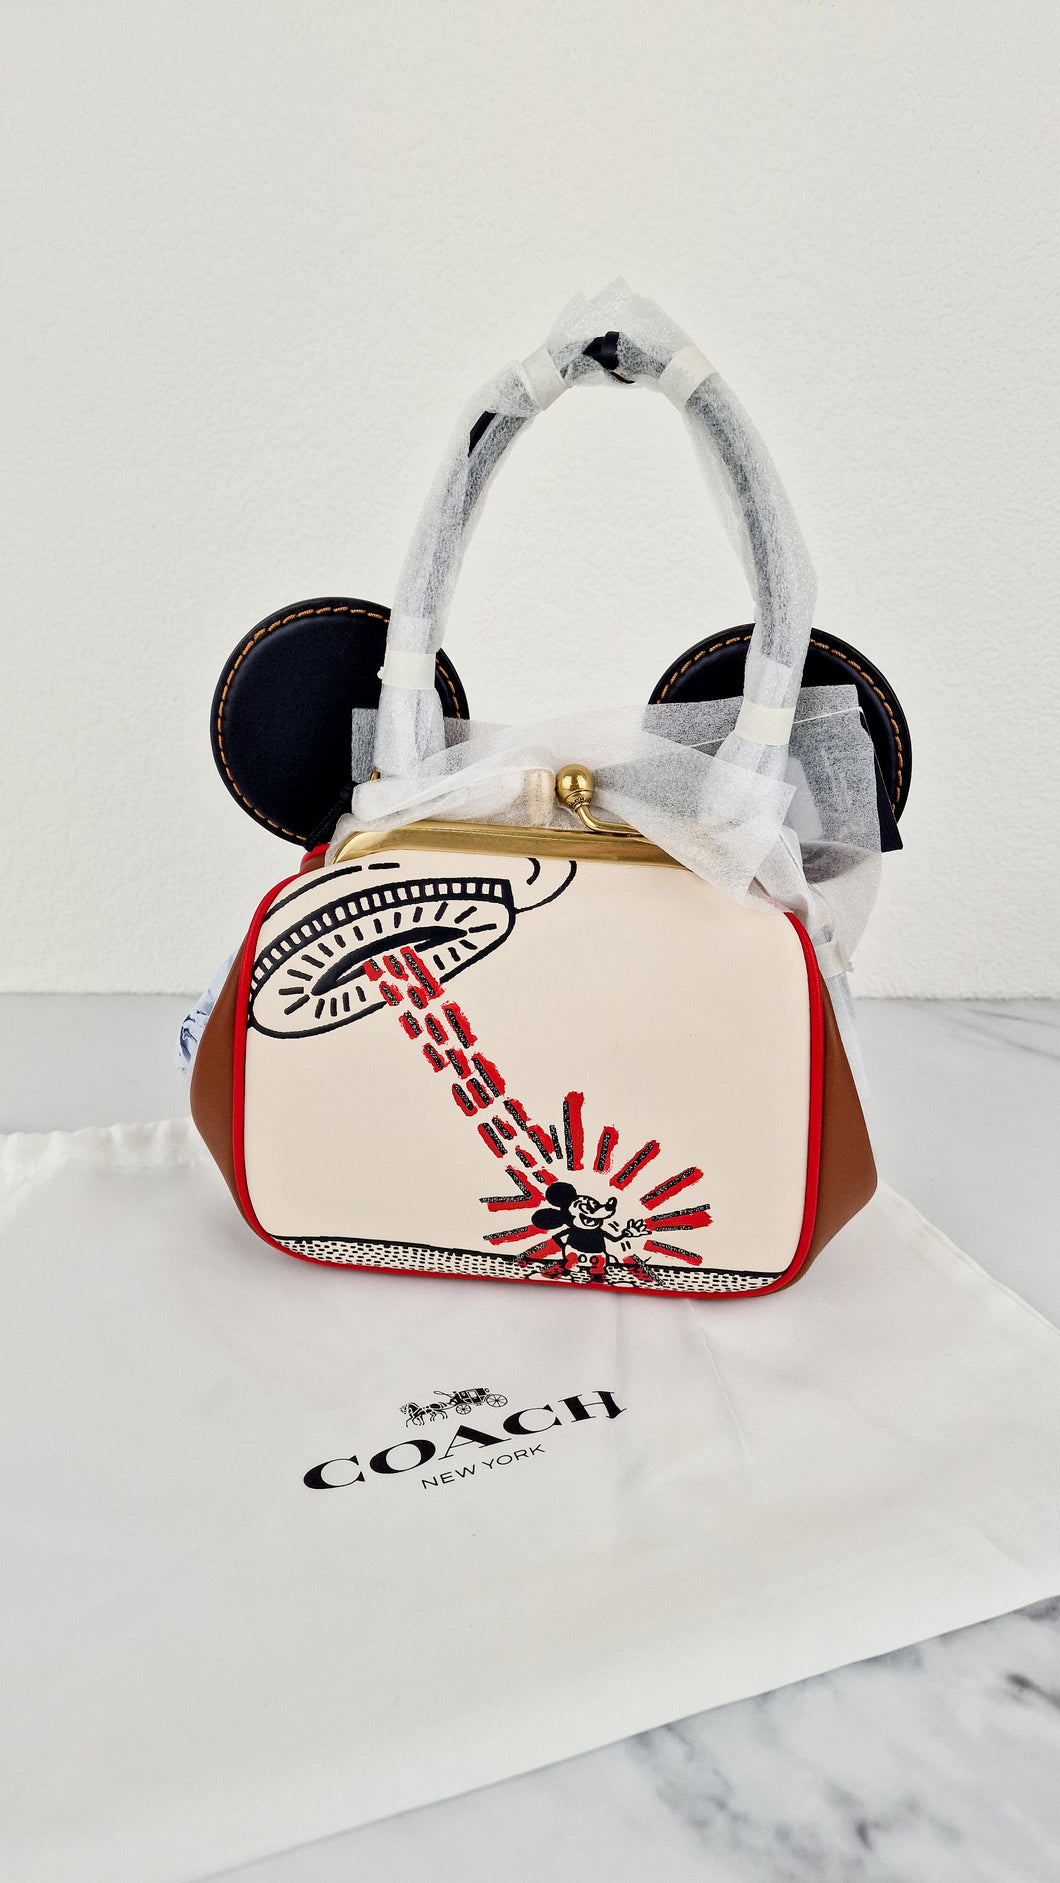 Disney x Coach x Keith Haring Mickey Mouse Kisslock Bag in Smooth Leather With Mickey Mouse and Spaceship Pop Art Crossbody Bag Handbag - Coach 4719